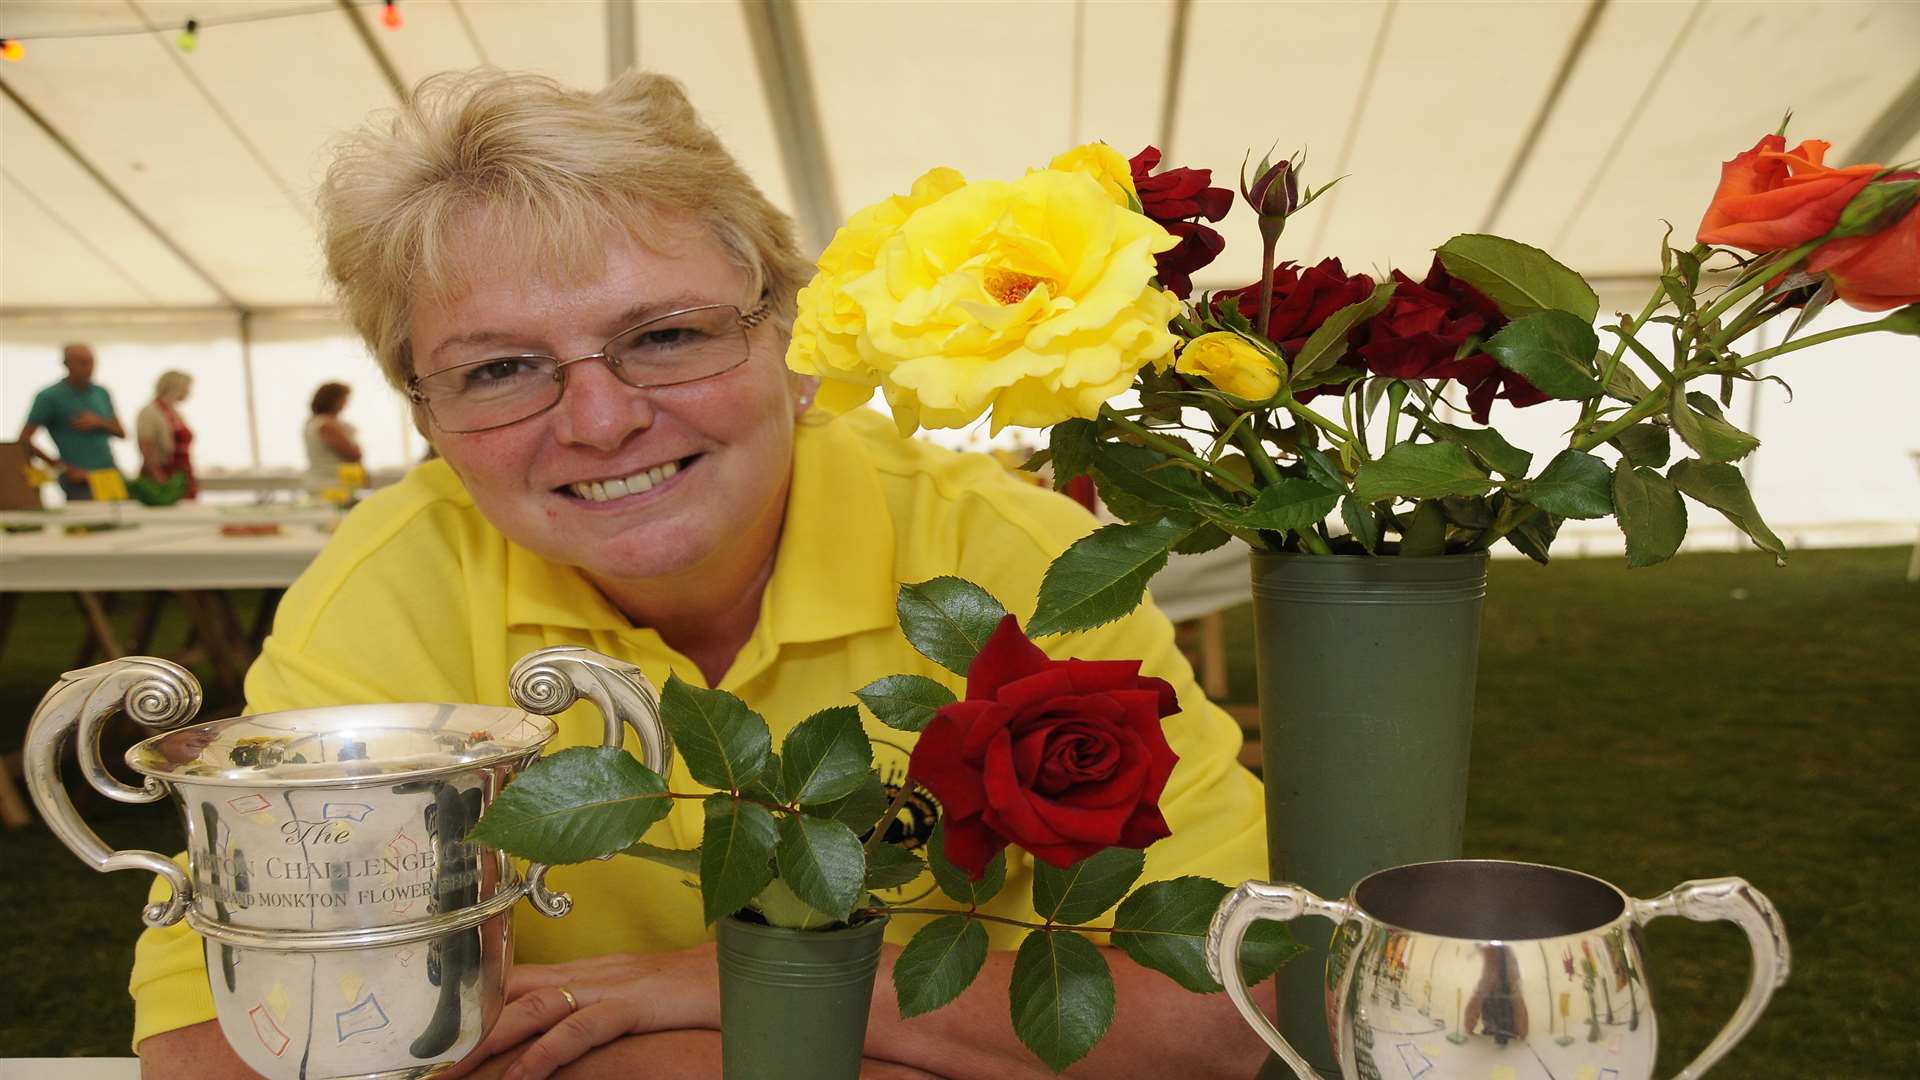 Ali Ainslie from Minster with her winning roses in a past Minster Show. Picture: Barry Duffield